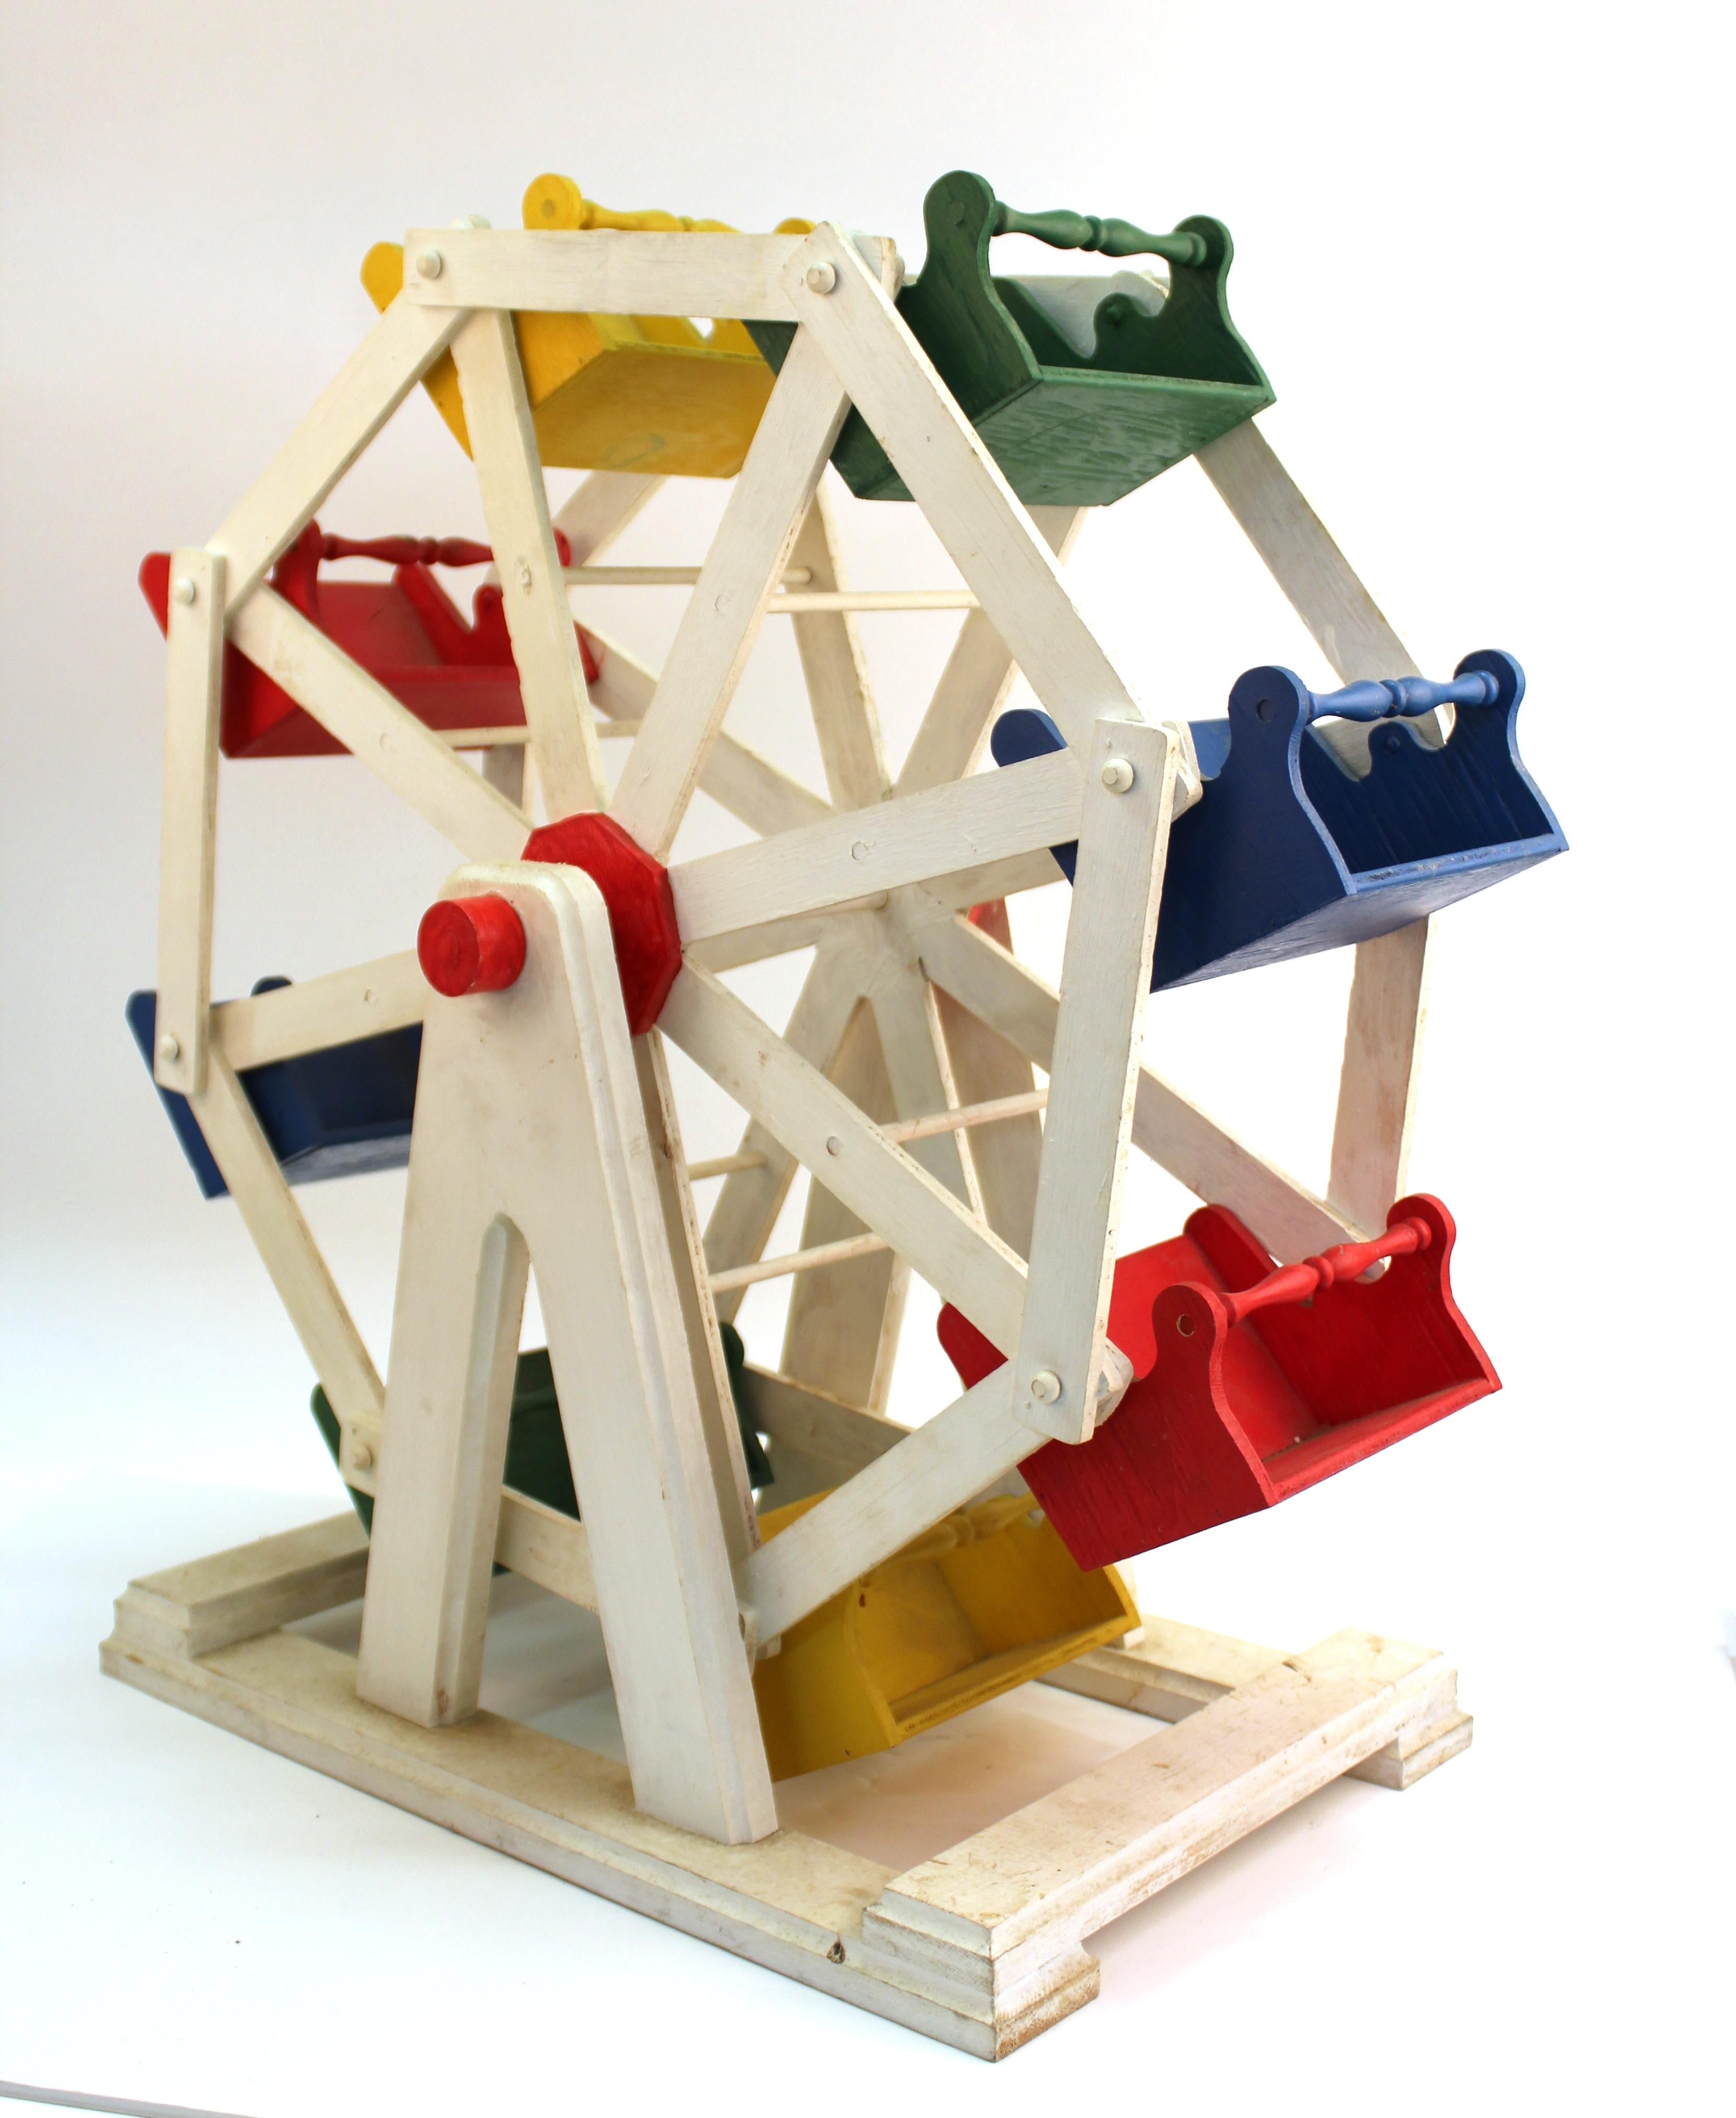 American Folk Art carnival Ferris wheel scale model with hand painted colorful seats. The wheel and the individual seats move when turned. In great vintage condition with age-appropriate wear and use.